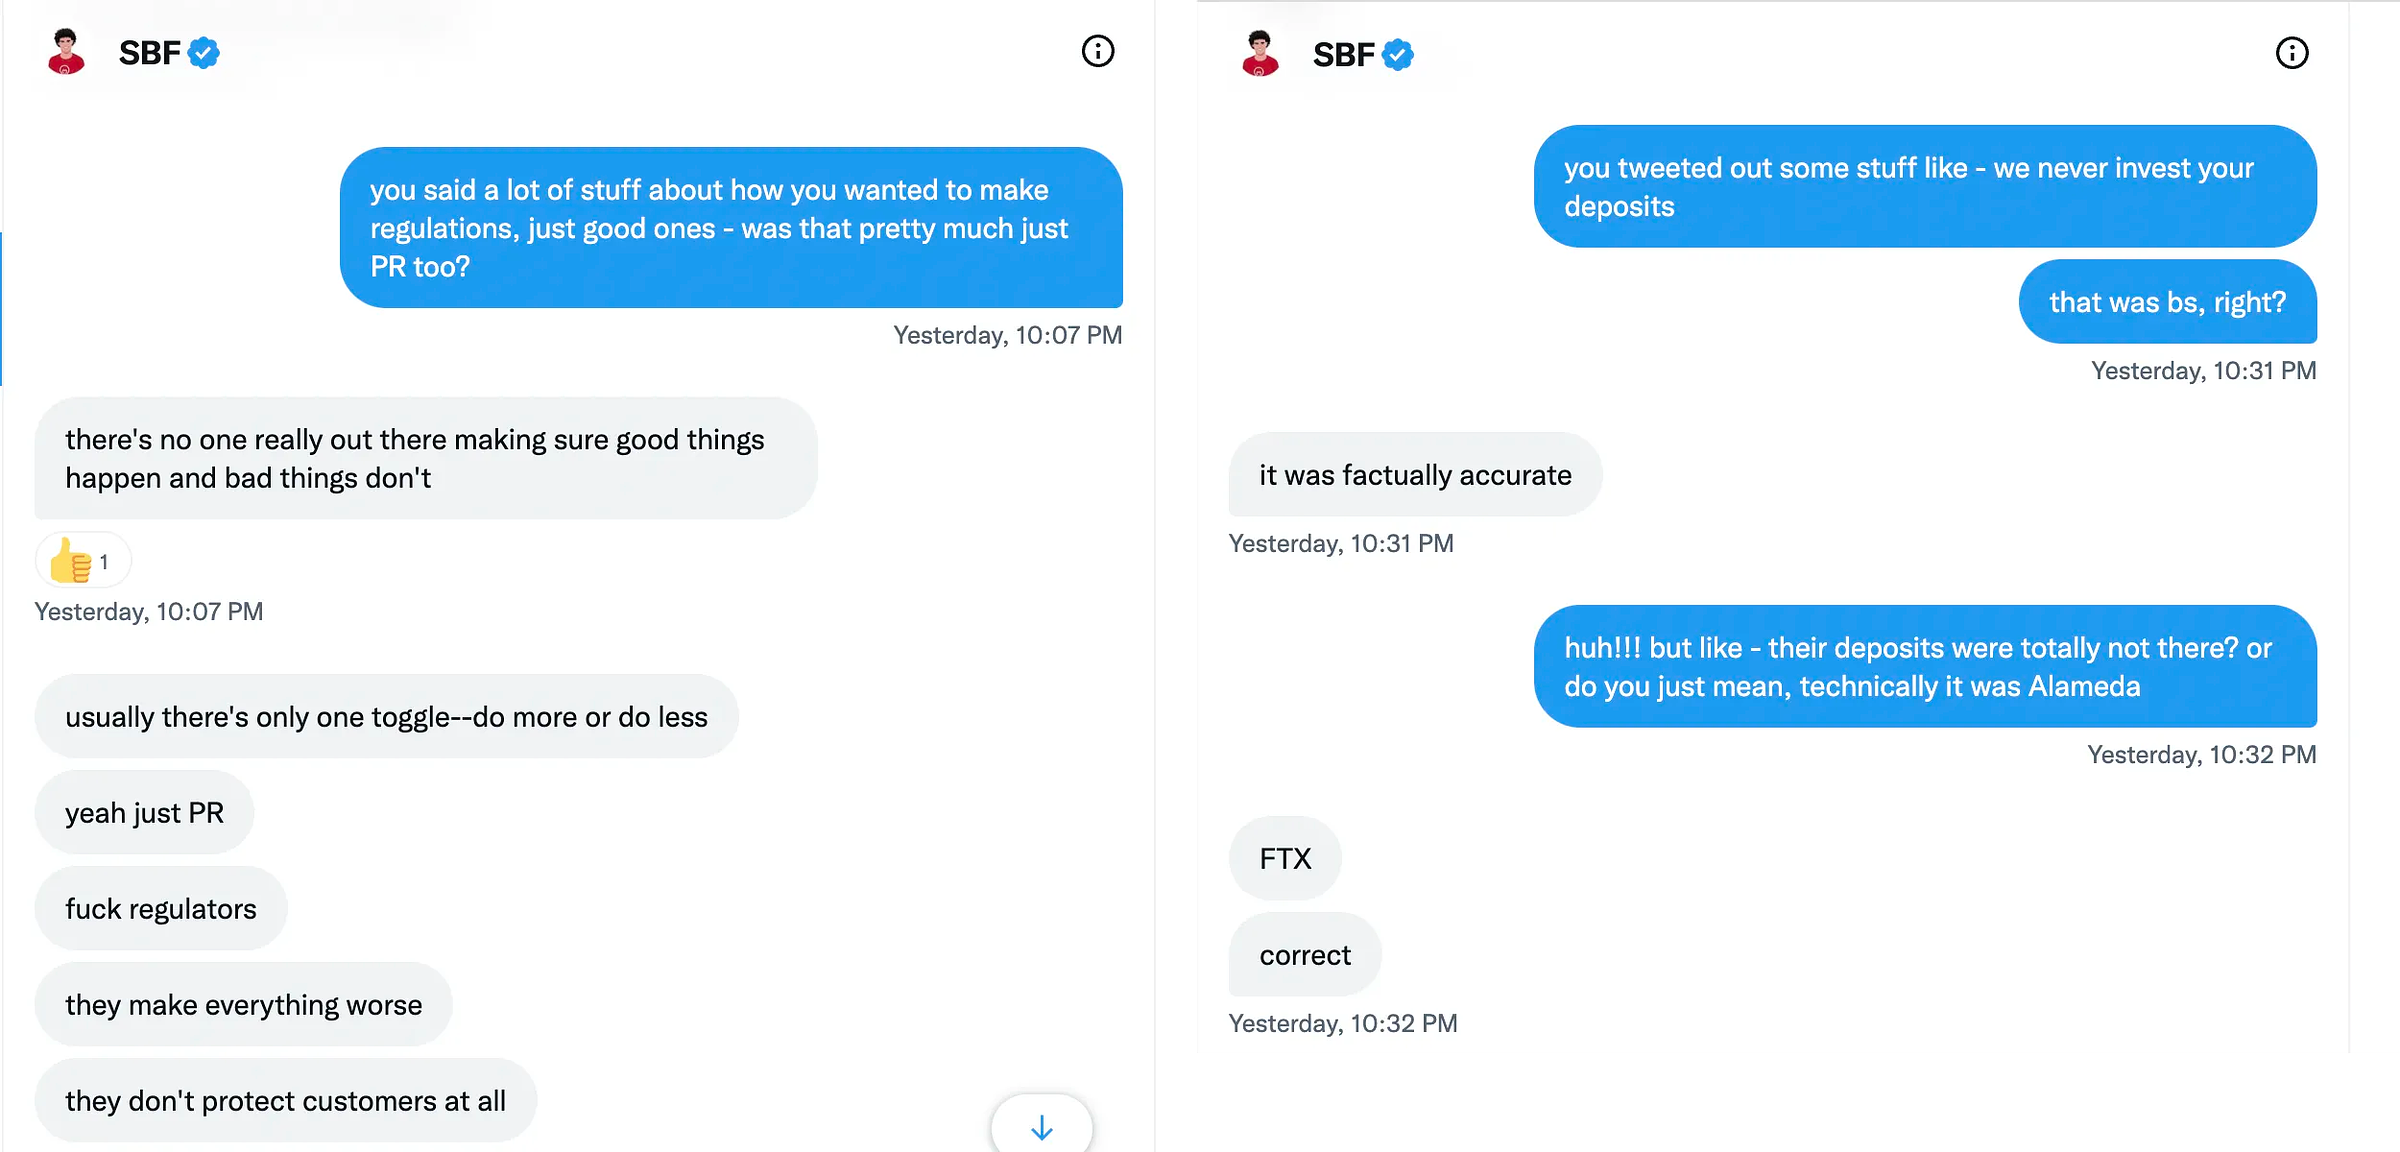 Two screenshots of Twitter DMs, side by side: Kelsey Piper: you said a lot of stuff about how you wanted to make regulations, just good ones - was that pretty much just PR too? Sam Bankman-Fried: there’s no one really out there making sure good things happen and bad things don’t; usually there’s only one toggle—do more or do less. yeah just PR; fuck regulators; they make everything worse; they don’t protect customers at all.   Kelsey Piper: you tweeted out some stuff like - we never invest your deposits. that was bs, right? Sam Bankman-Fried: it was factually accurate Kelsey Piper: huh!!! but like - their deposits were totally not there? or do you just mean, technically it was Alameda Sam Bankman-Fried: FTX. correct  